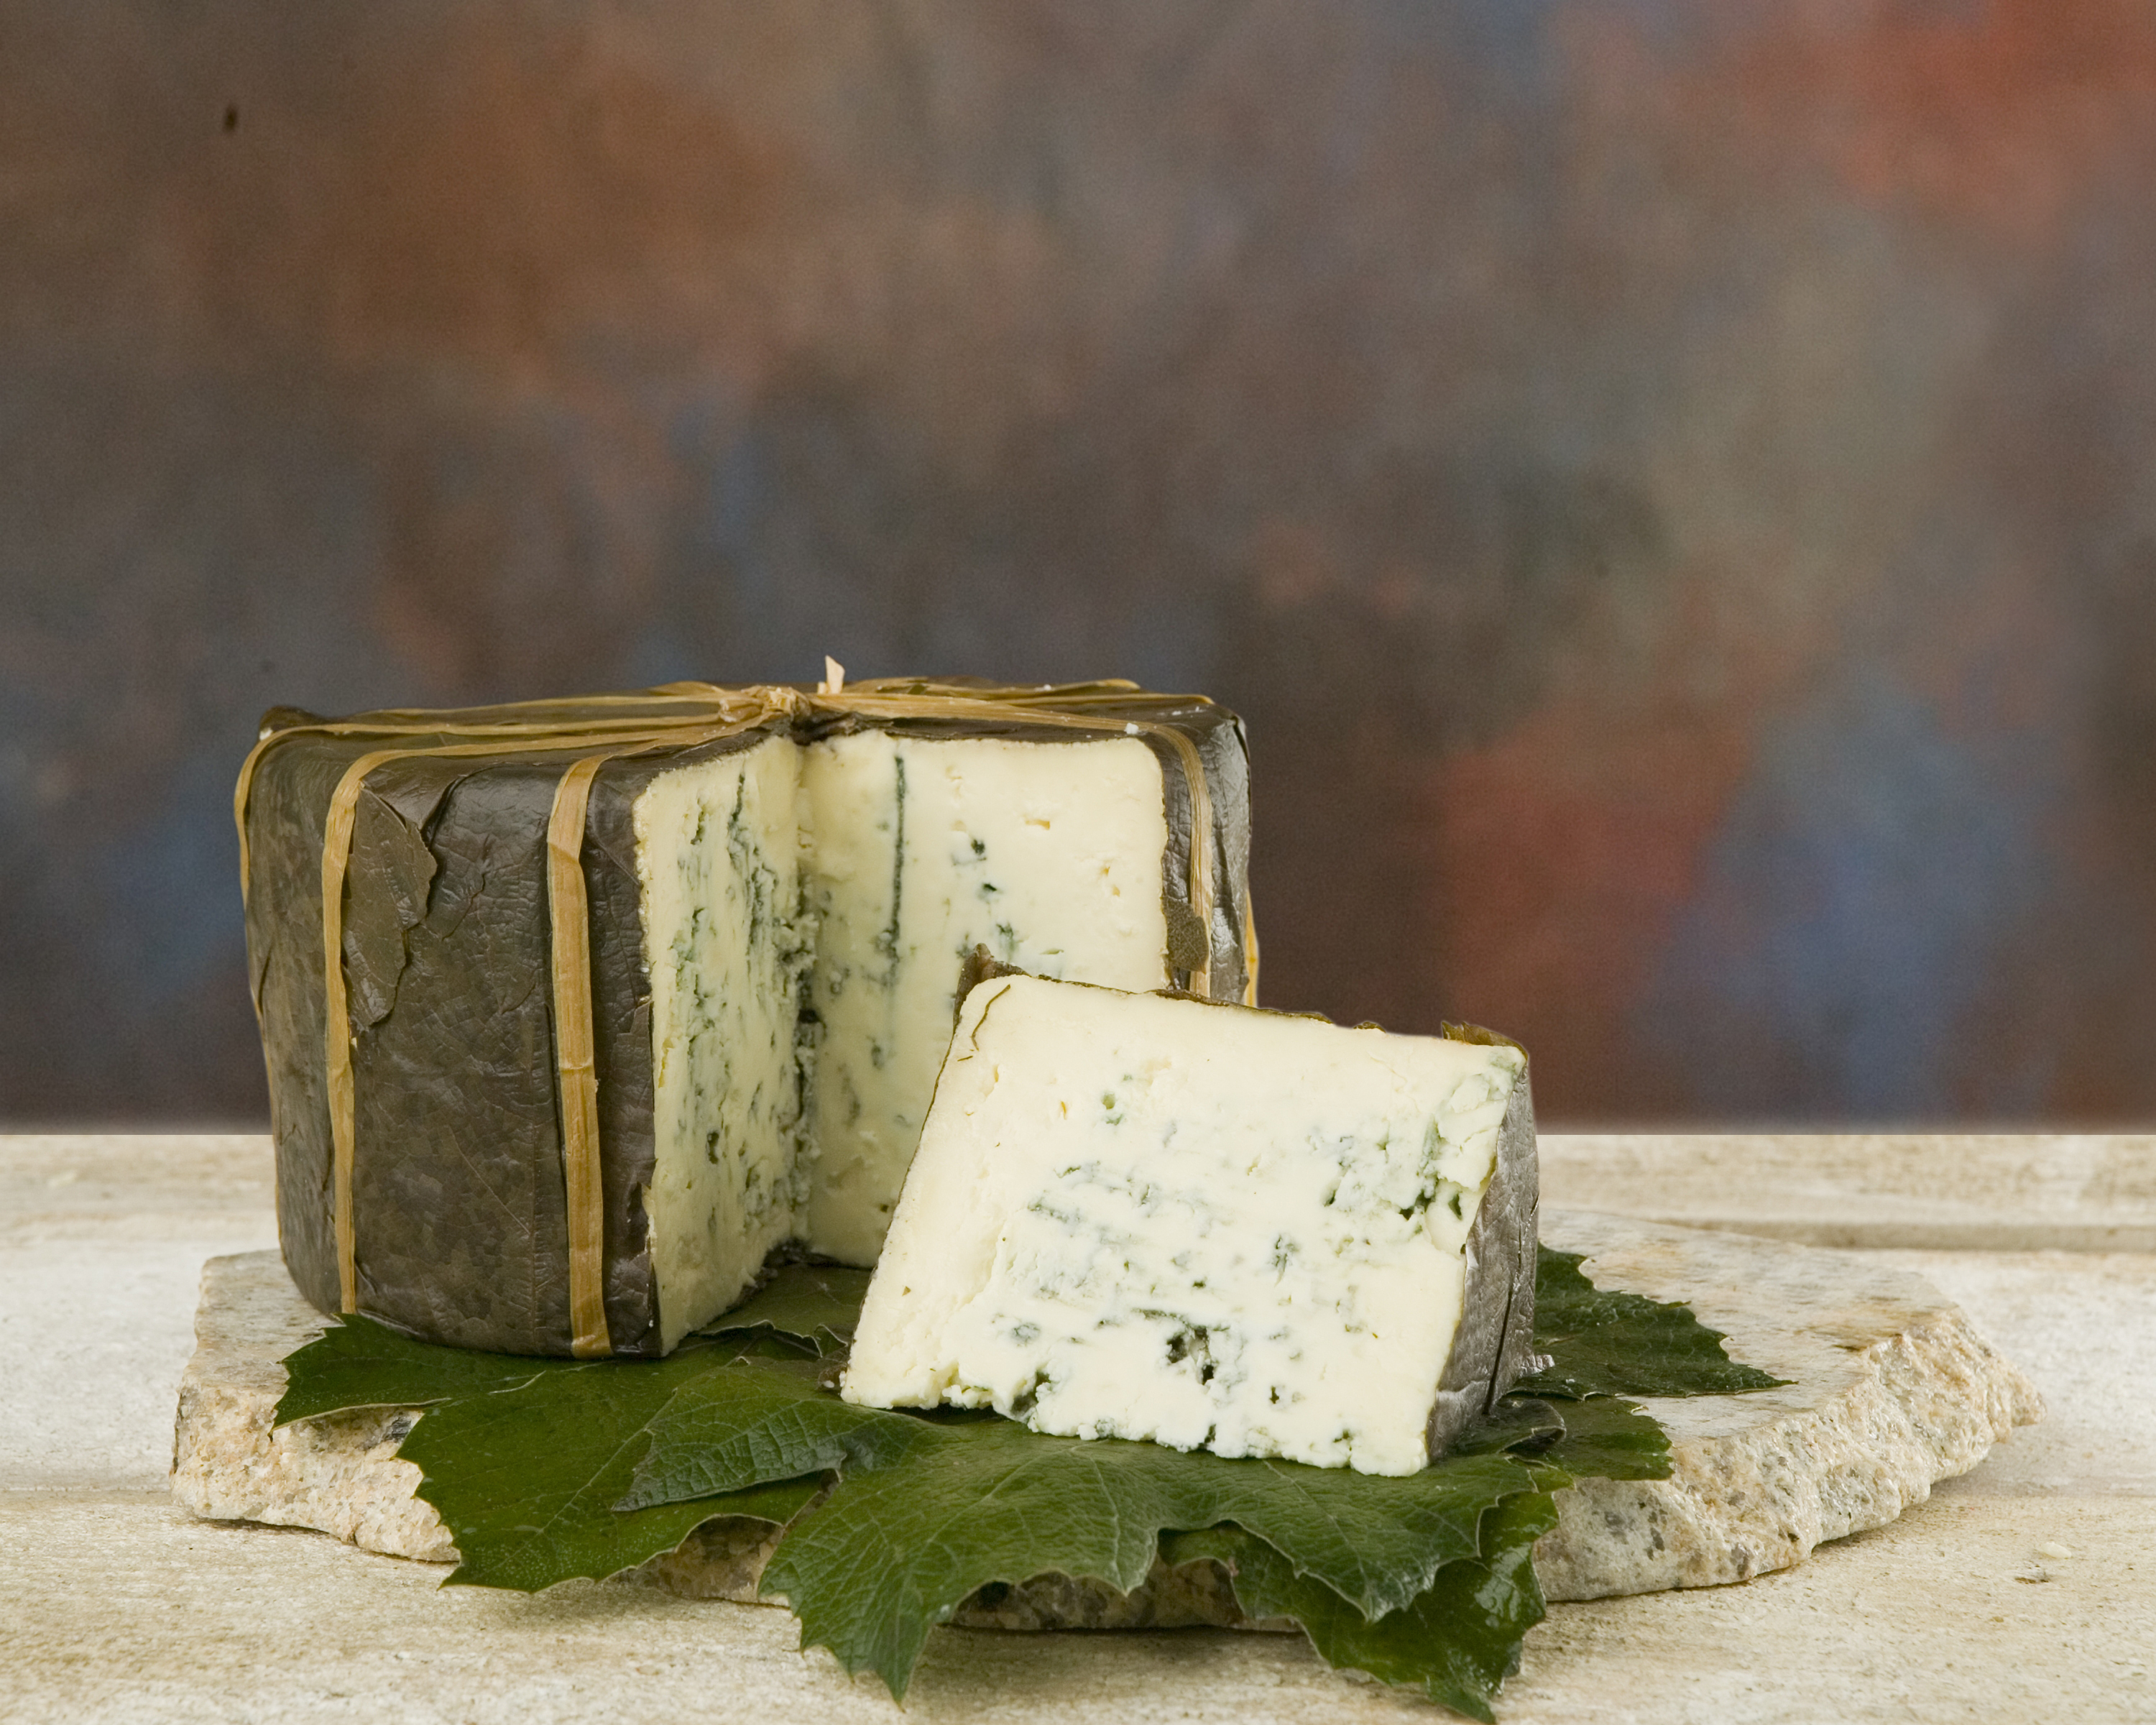 Rogue River Blue Cheese